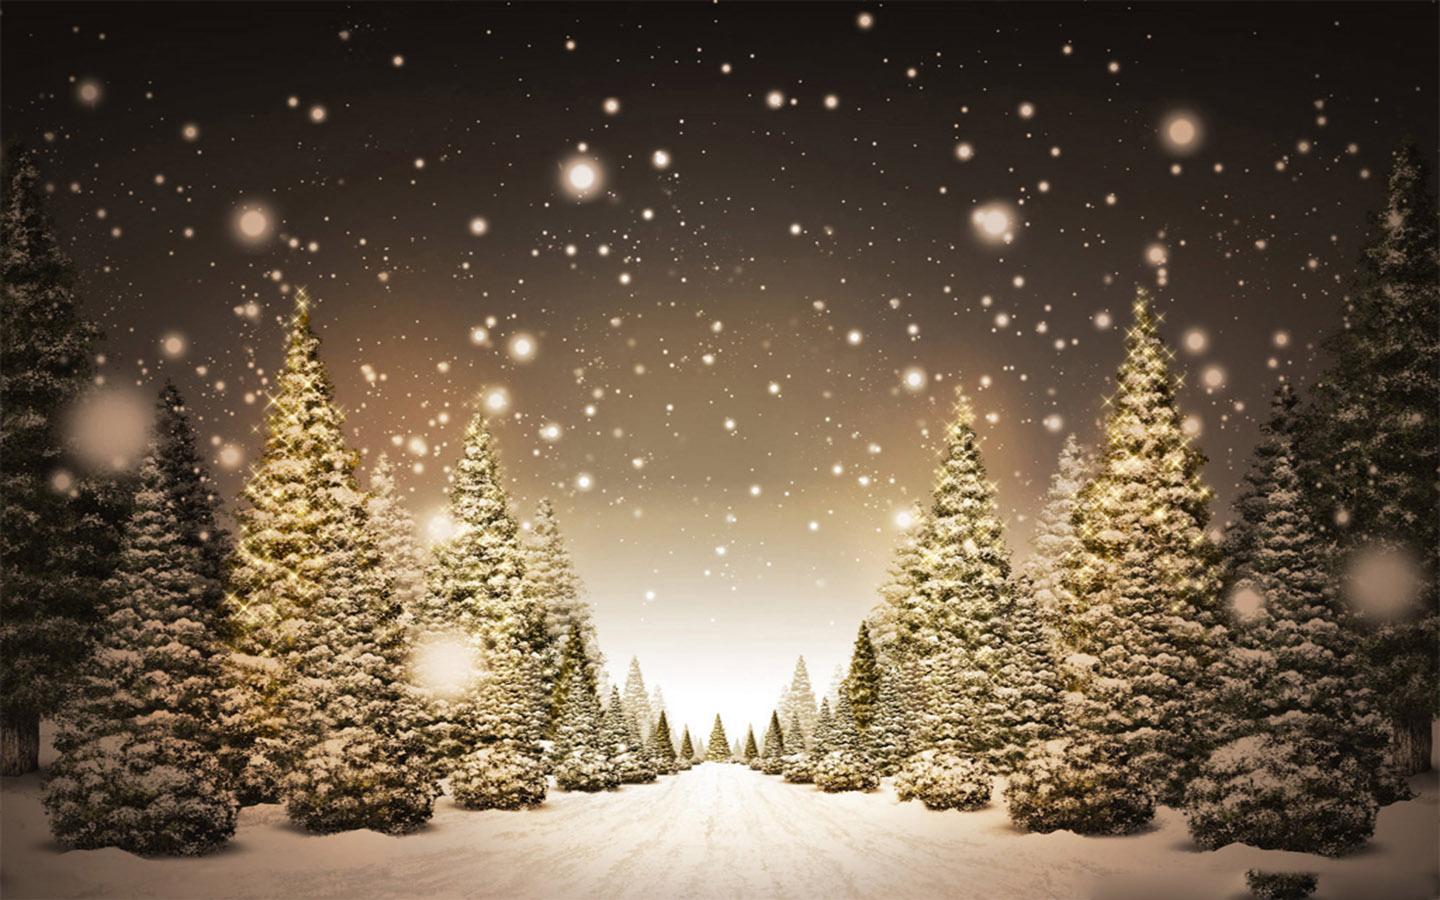  /><br /><br/><p>Christmas Snow</p></center></center>
<div style='clear: both;'></div>
</div>
<div class='post-footer'>
<div class='post-footer-line post-footer-line-1'>
<div style=